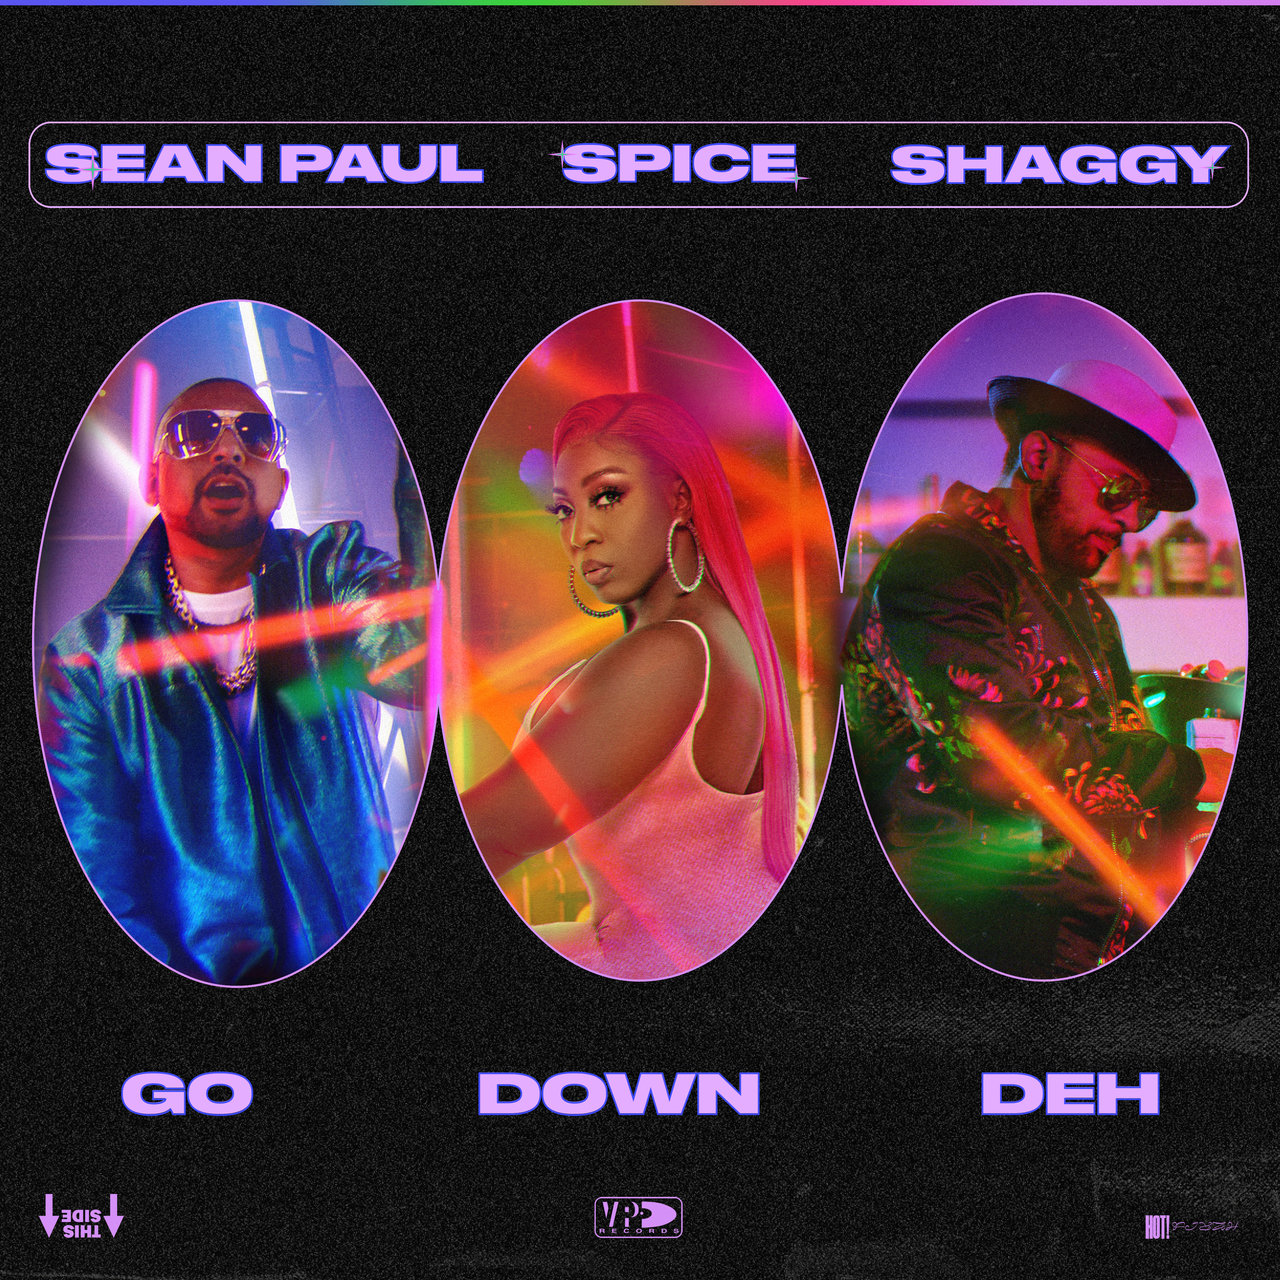 Spice - Go Down Deh (ft. Sean Paul and Shaggy) (Cover)